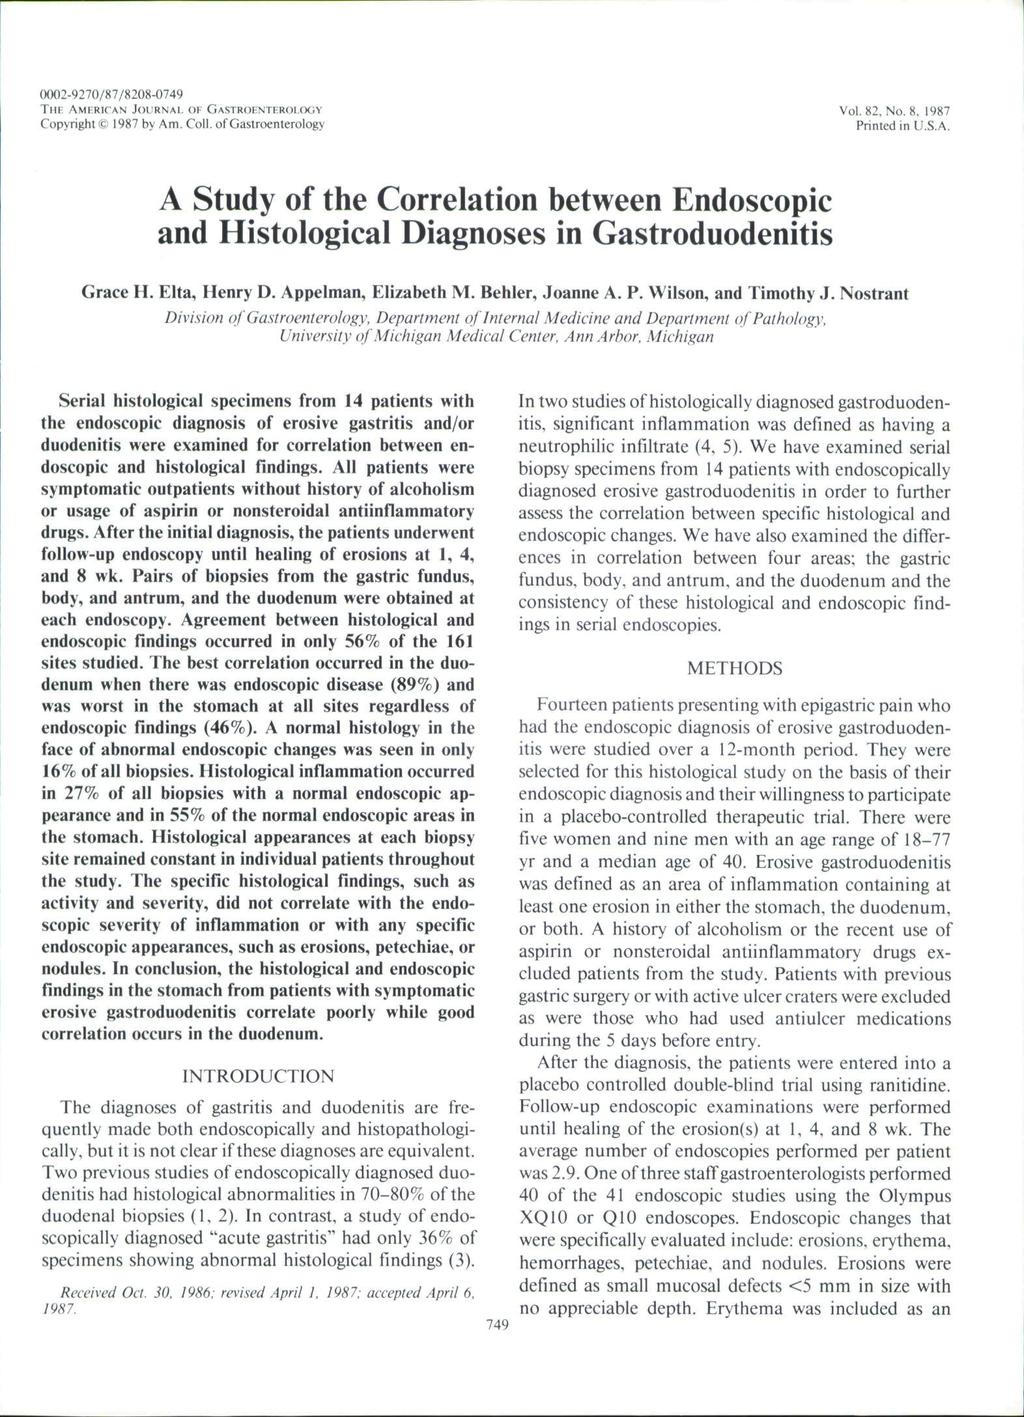 000-9 70/8 7/80S-0749 THE AMERICAN JOIIRNAE. OF GAsrR()E.NrER<)i.(x;Y Copyrighttc> 1987 by Am. Coll.ofGastroenterology Vo!.8. No. 8, 1487 Printed in U.S.A. A Study of the Correlation between Endoscopic and Histological Diagnoses in Gastroduodenitis Grace H.